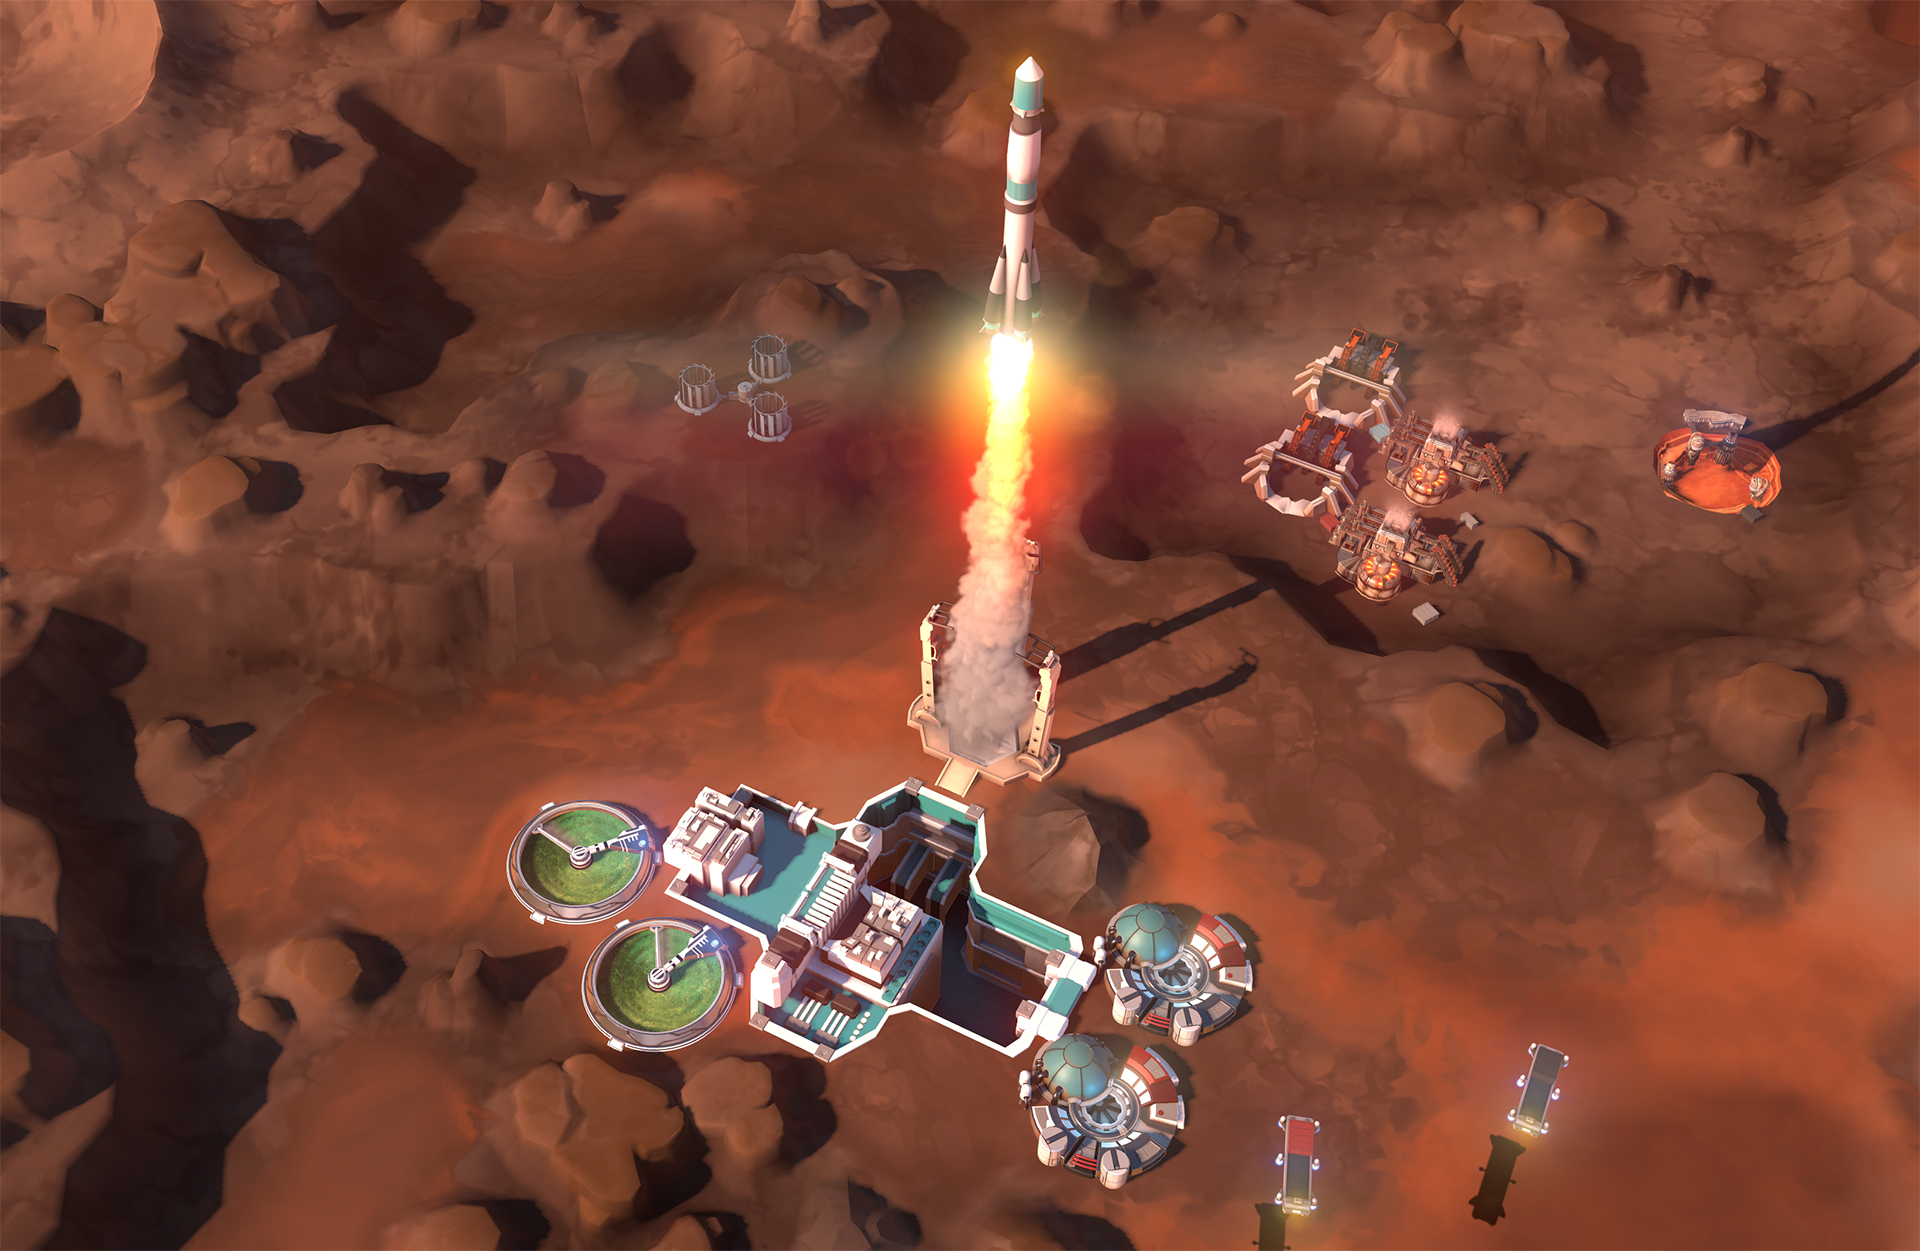 offworld trading company free download